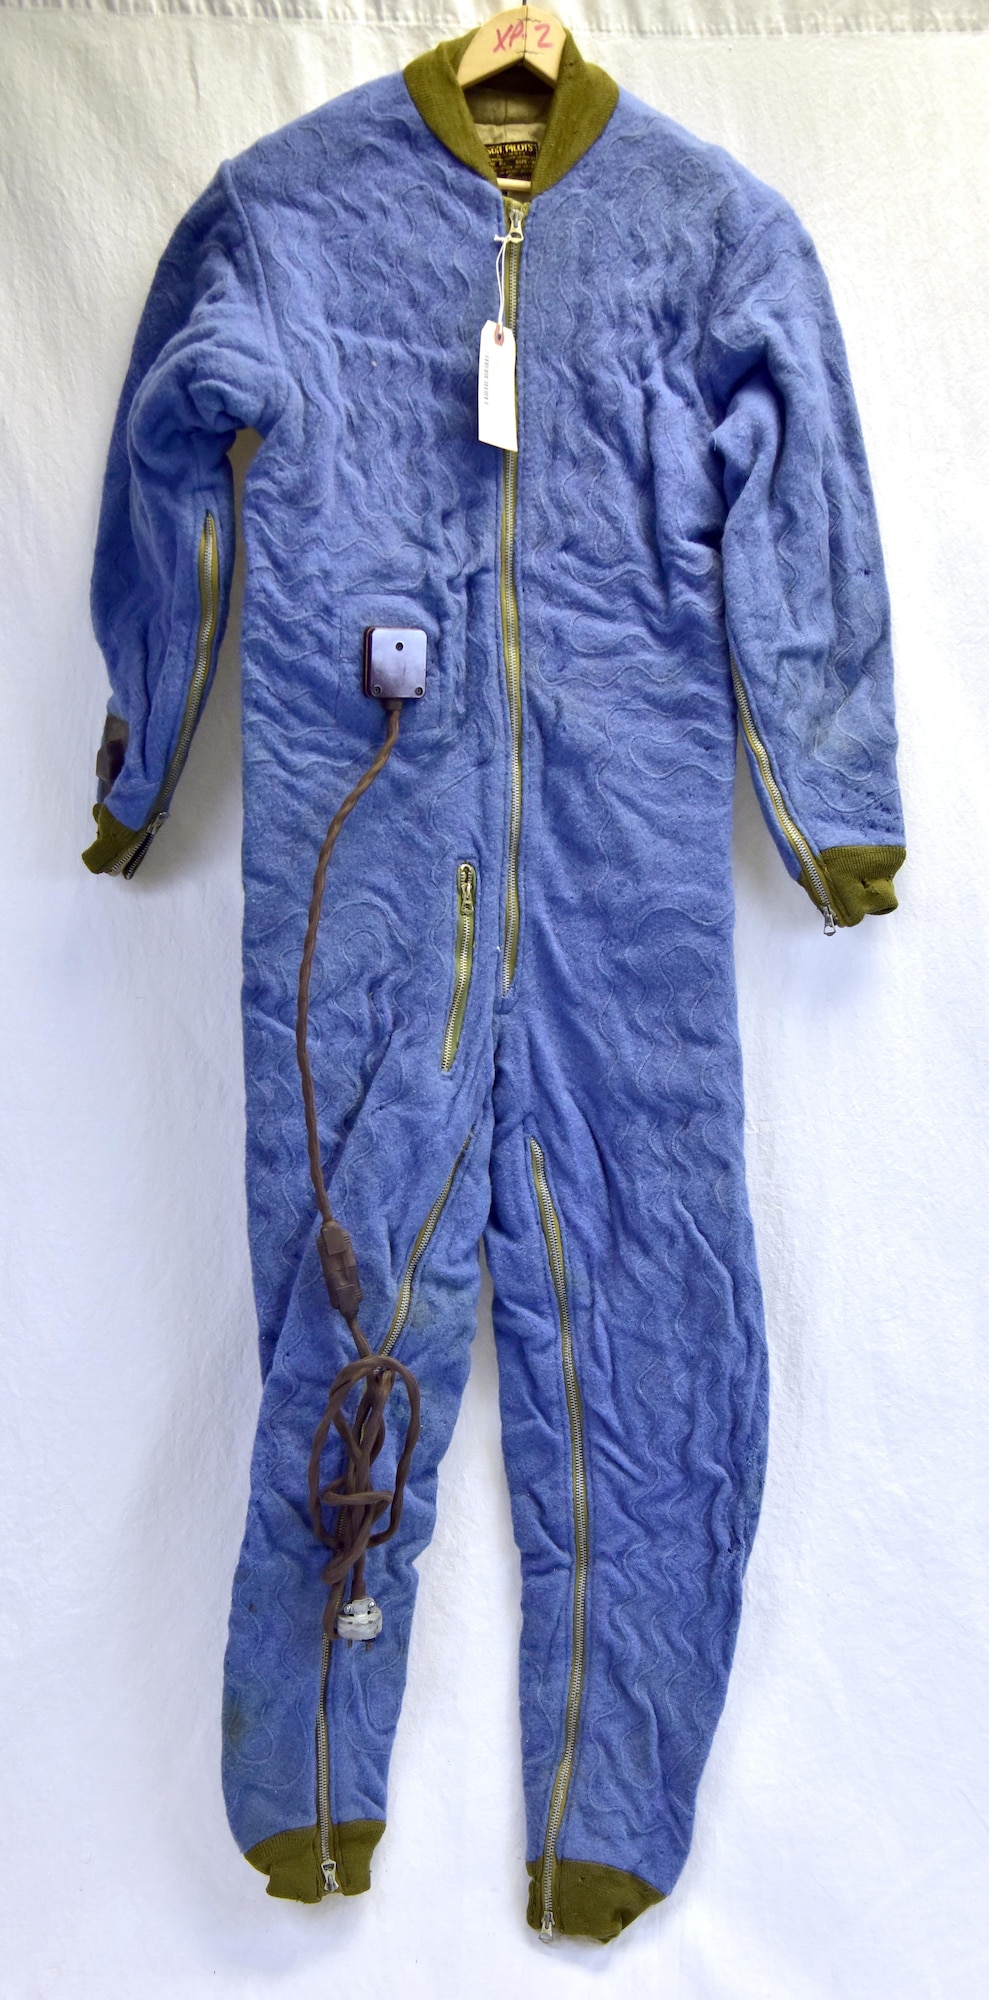 Plans call for this artifact to be displayed near the B-17F Memphis Belle™ as part of the new strategic bombardment exhibit in the WWII Gallery, which opens to the public on May 17, 2018. F-1 “Blue Bunny” electrically-heated suit. The first type used by bomber crews, its internal wires often broke in use, shocking the wearer.